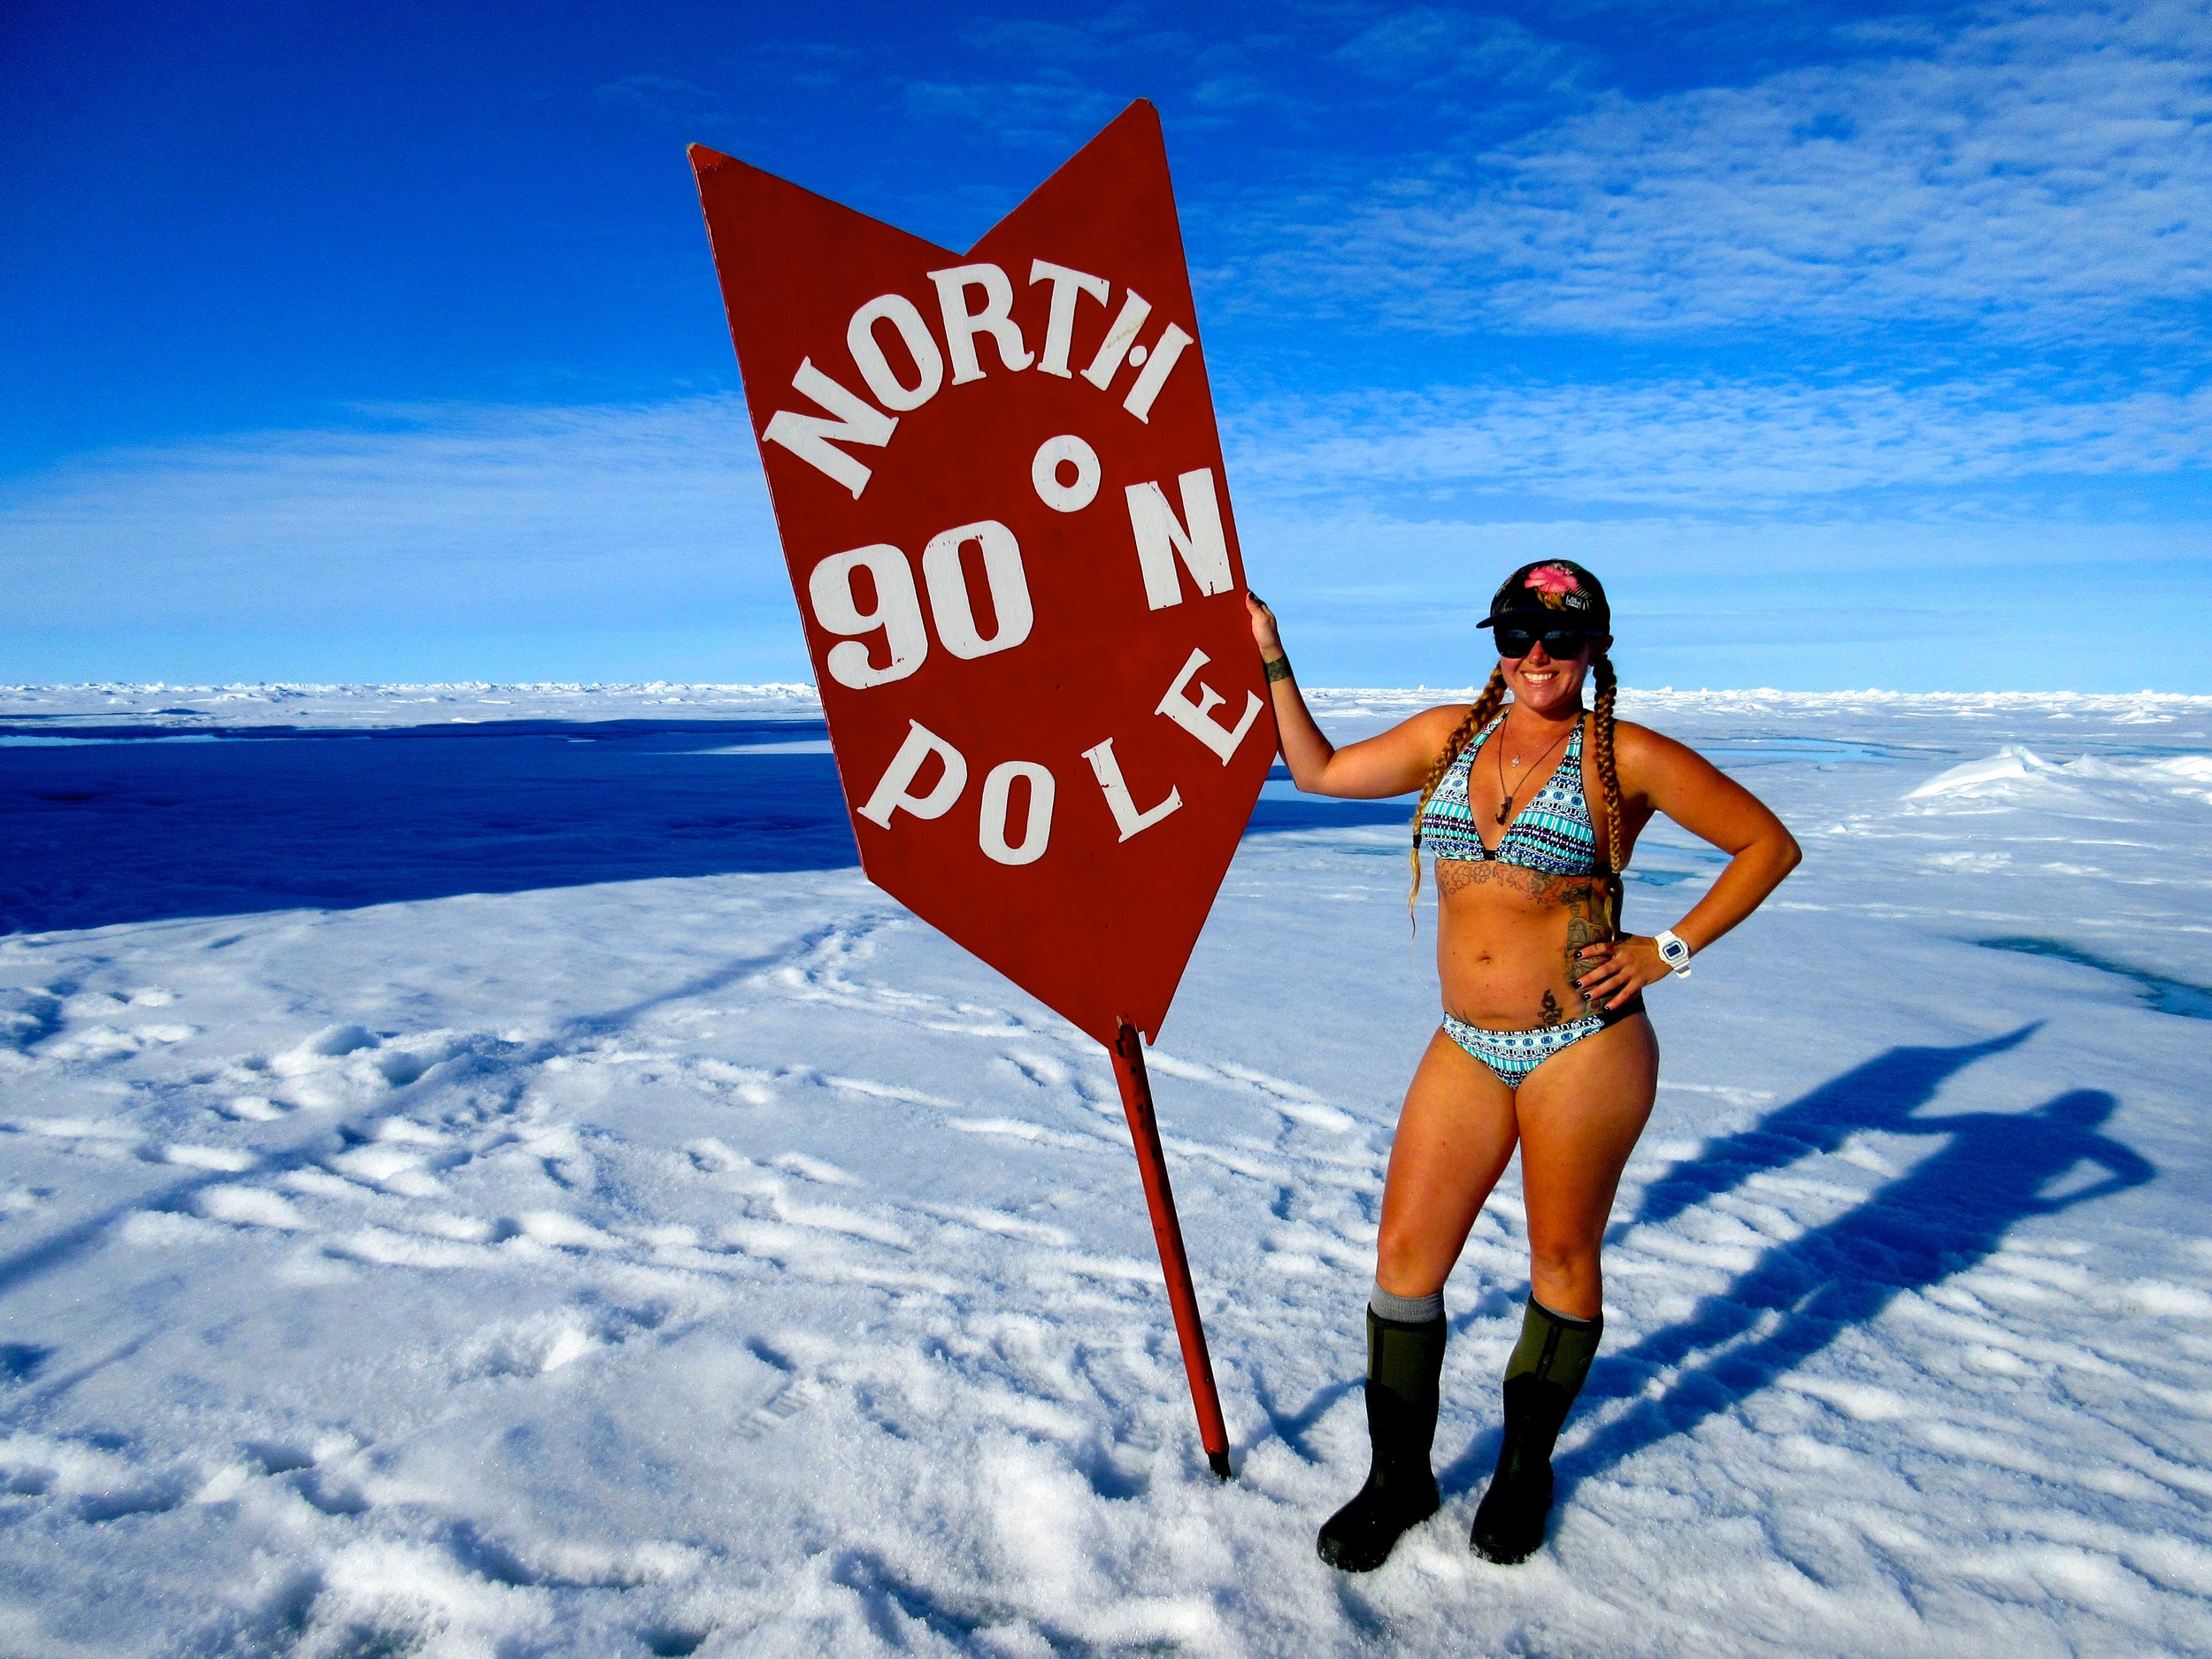 Posing in a bikini at the North Pole in 2016 was no big deal for Breezy Grenier of Portsmouth, who scuba dives year round in New England and is used to cold weather.